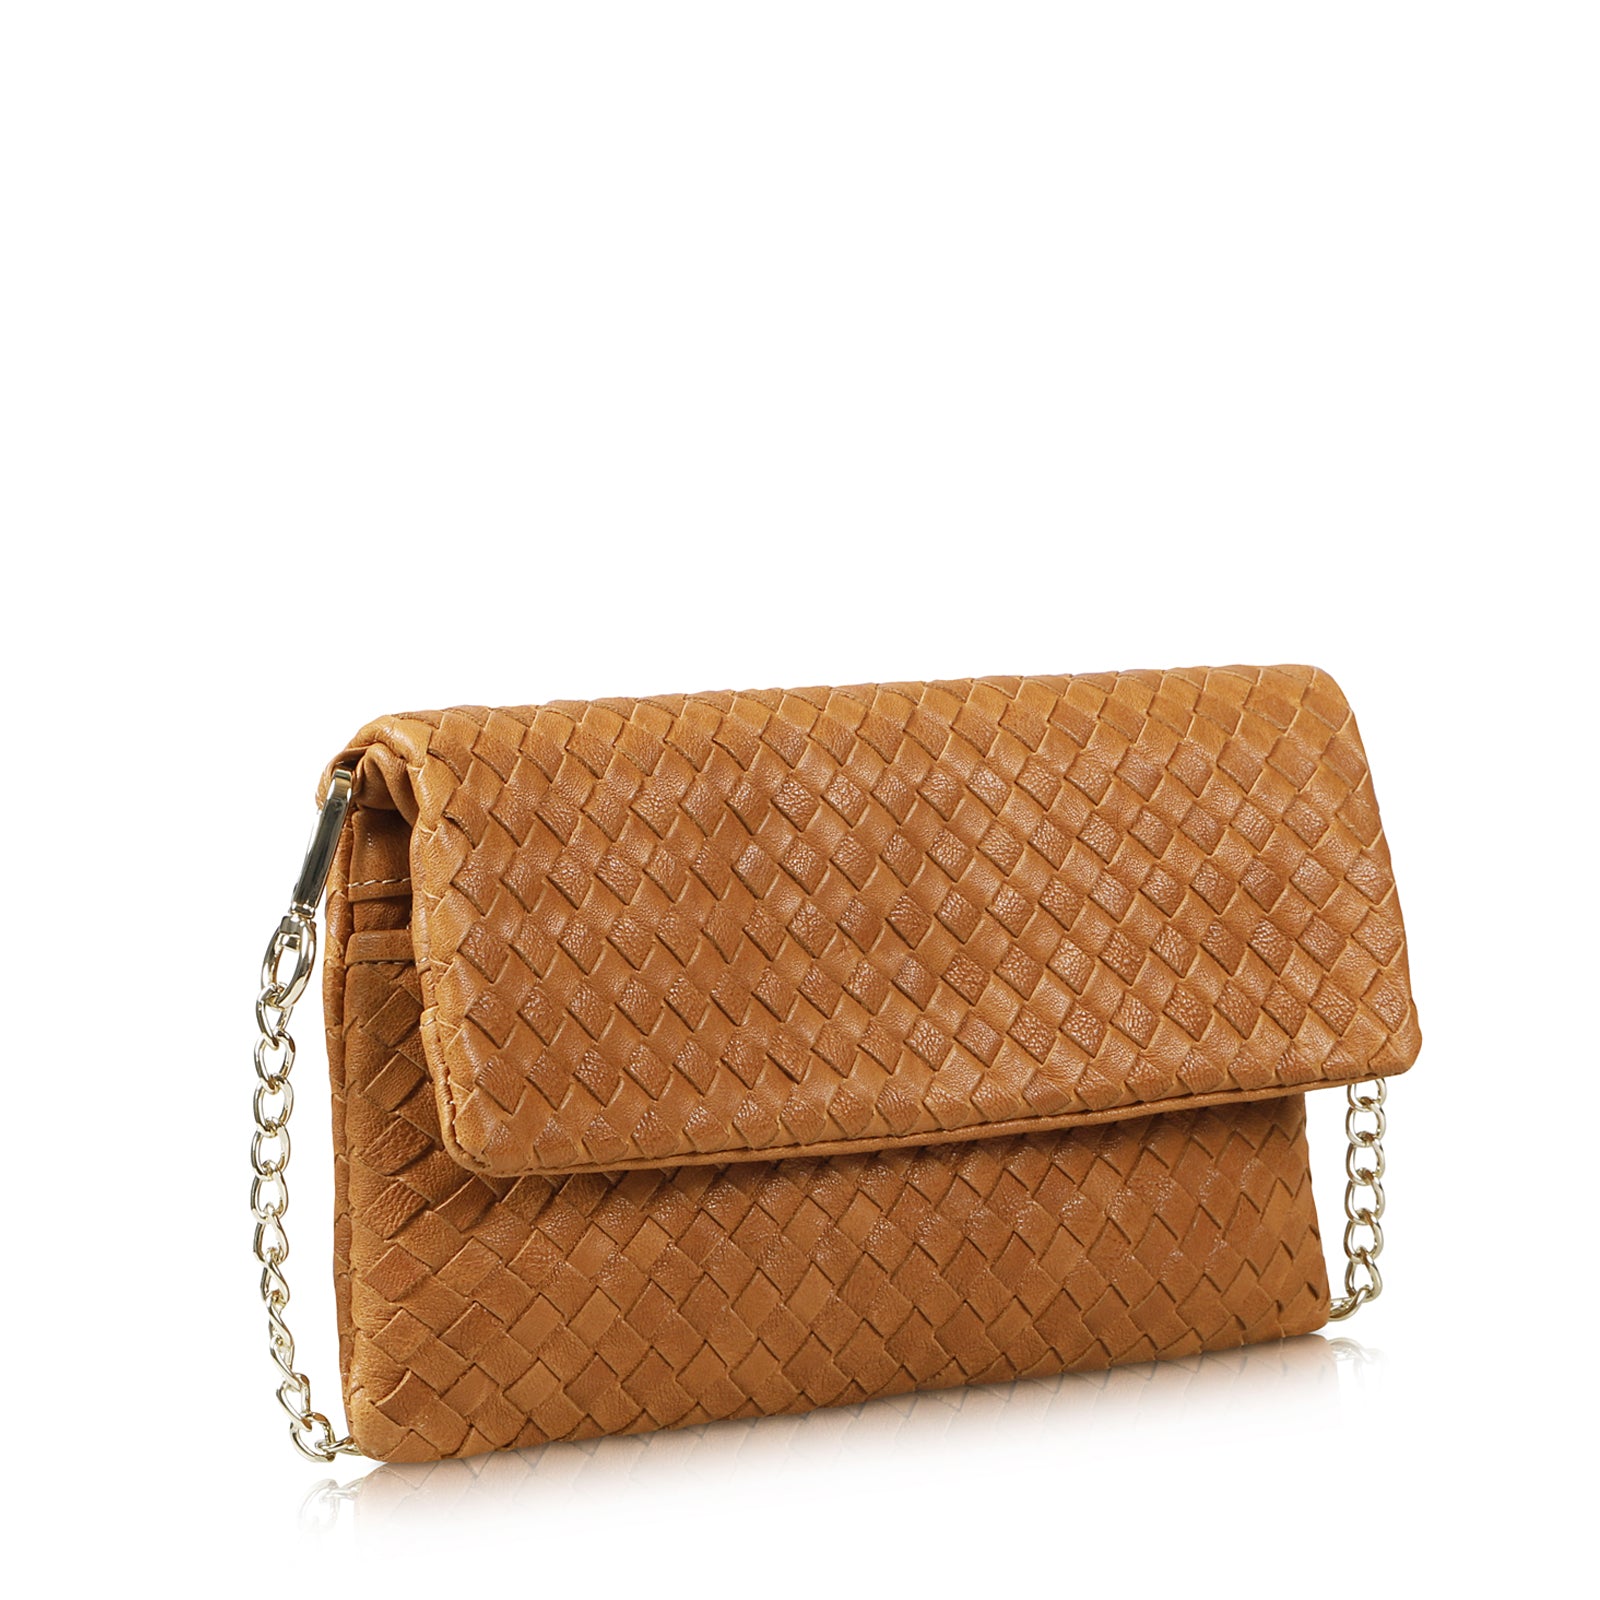 foldover clutch with tabs - woven twilight